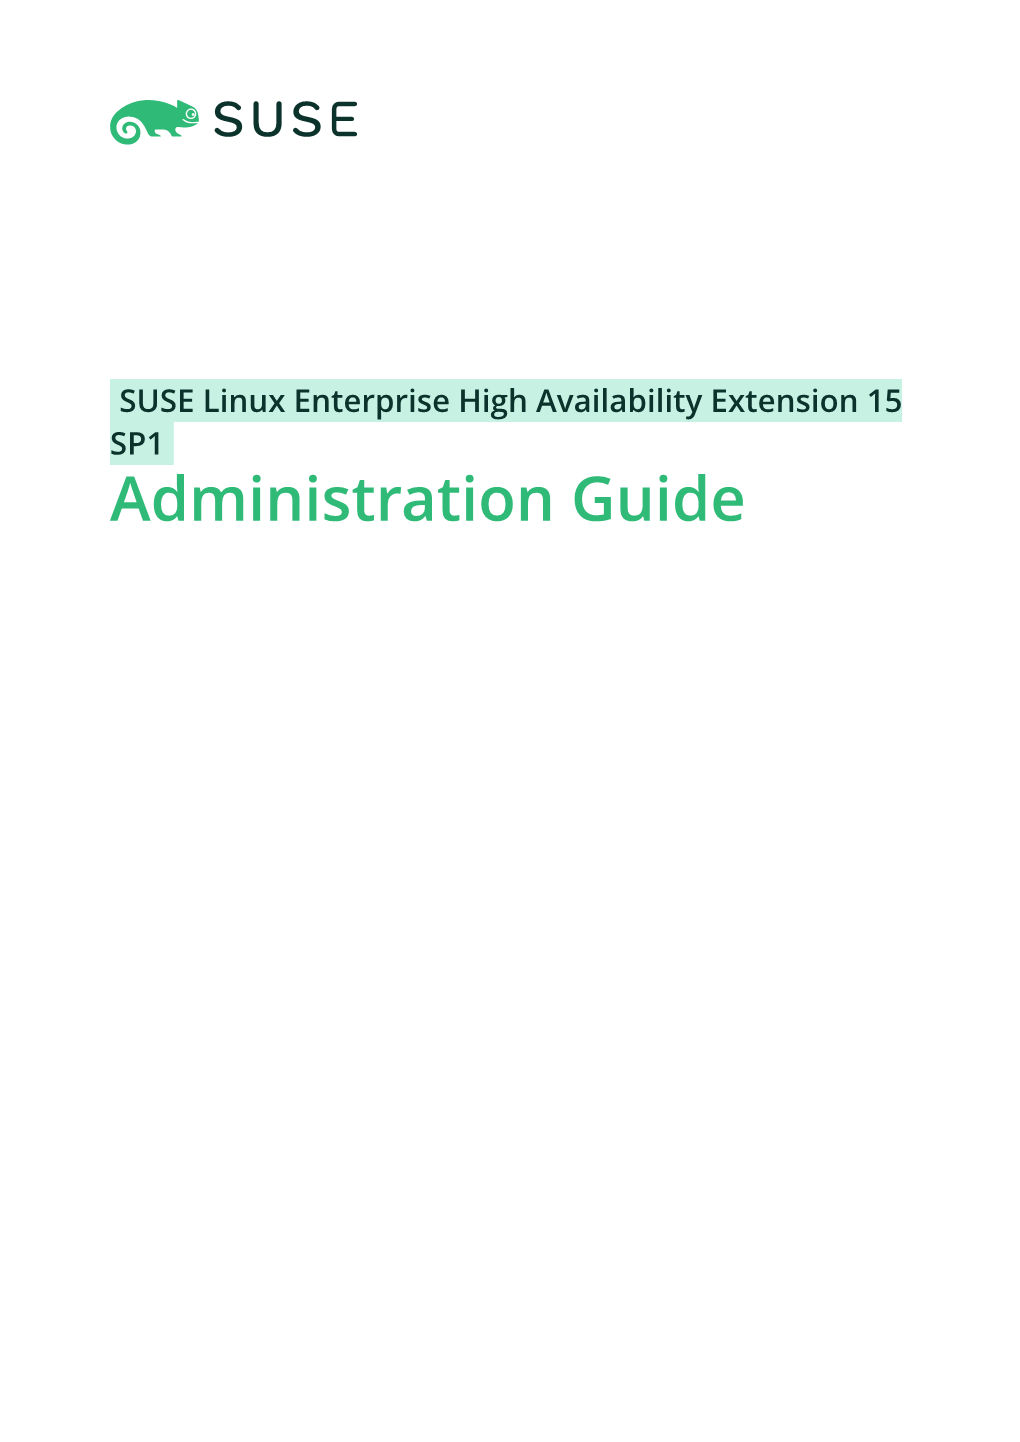 Administration Guide Administration Guide SUSE Linux Enterprise High Availability Extension 15 SP1 by Tanja Roth and Thomas Schraitle